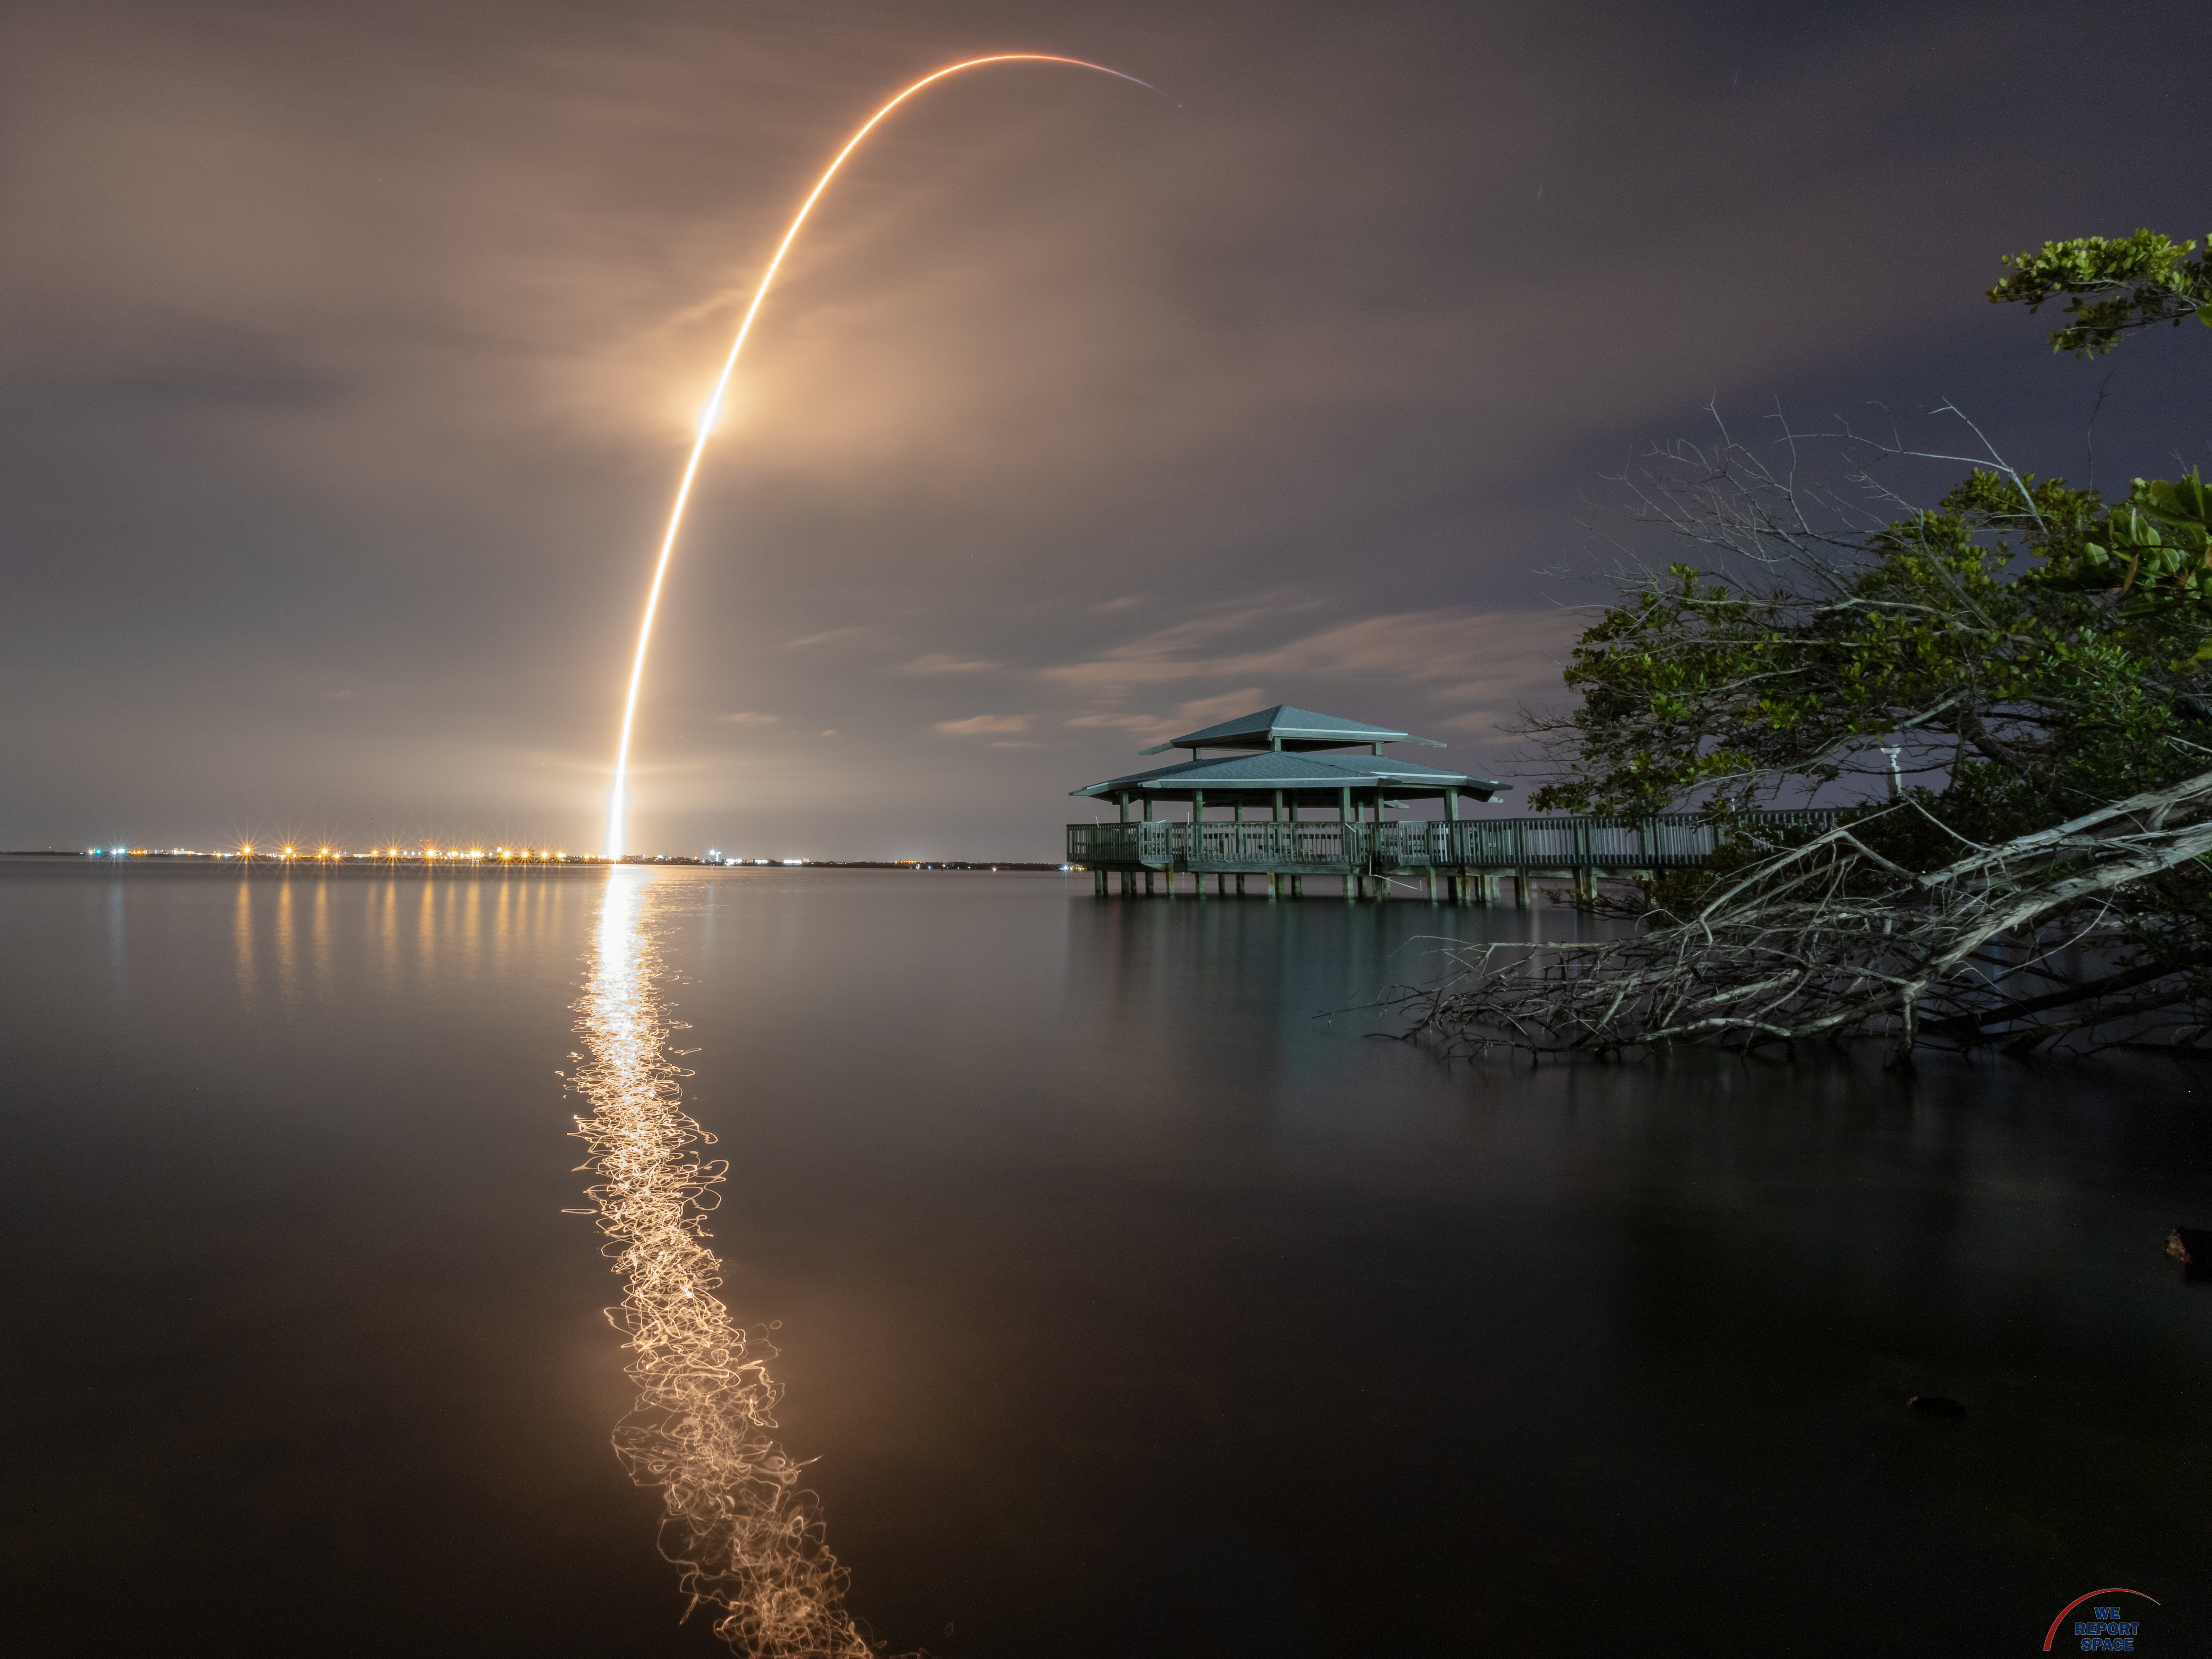 General 6144x4608 SpaceX trees water rocket clouds launching space rocket reflection watermarked starlink 2022 (year) Cape Canaveral night long exposure Falcon 9